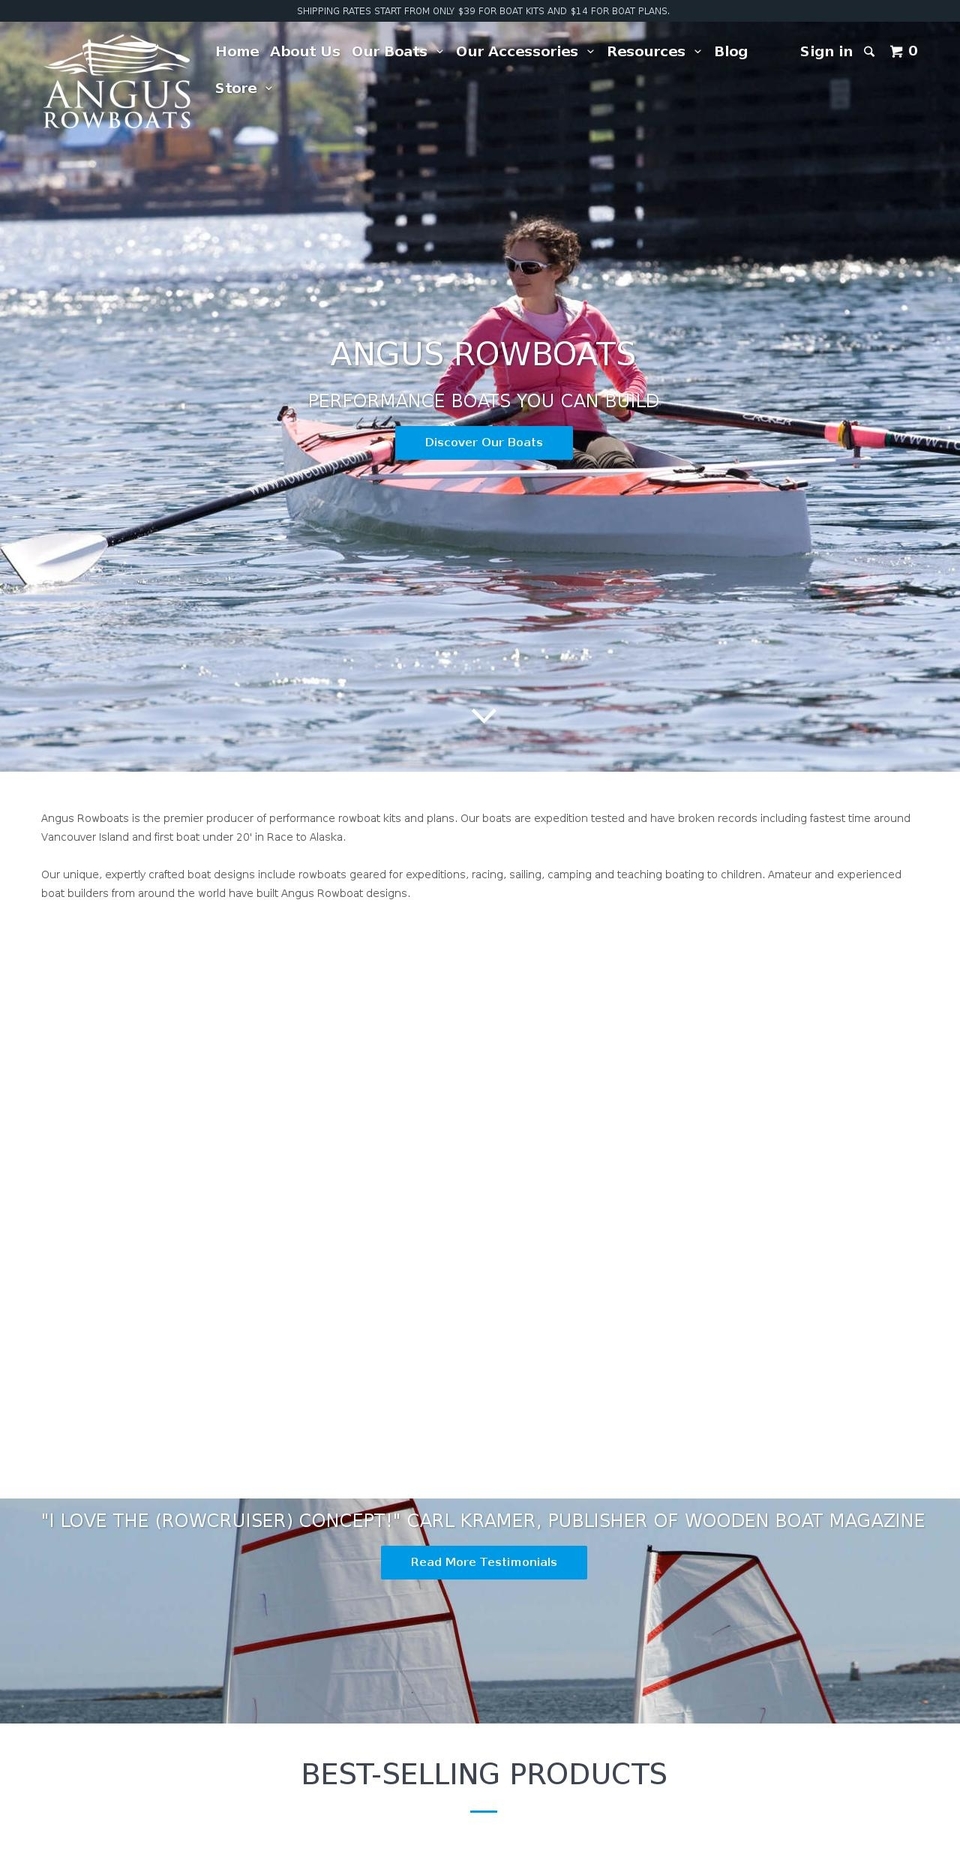 Parallax Shopify theme site example angusrowboats.com